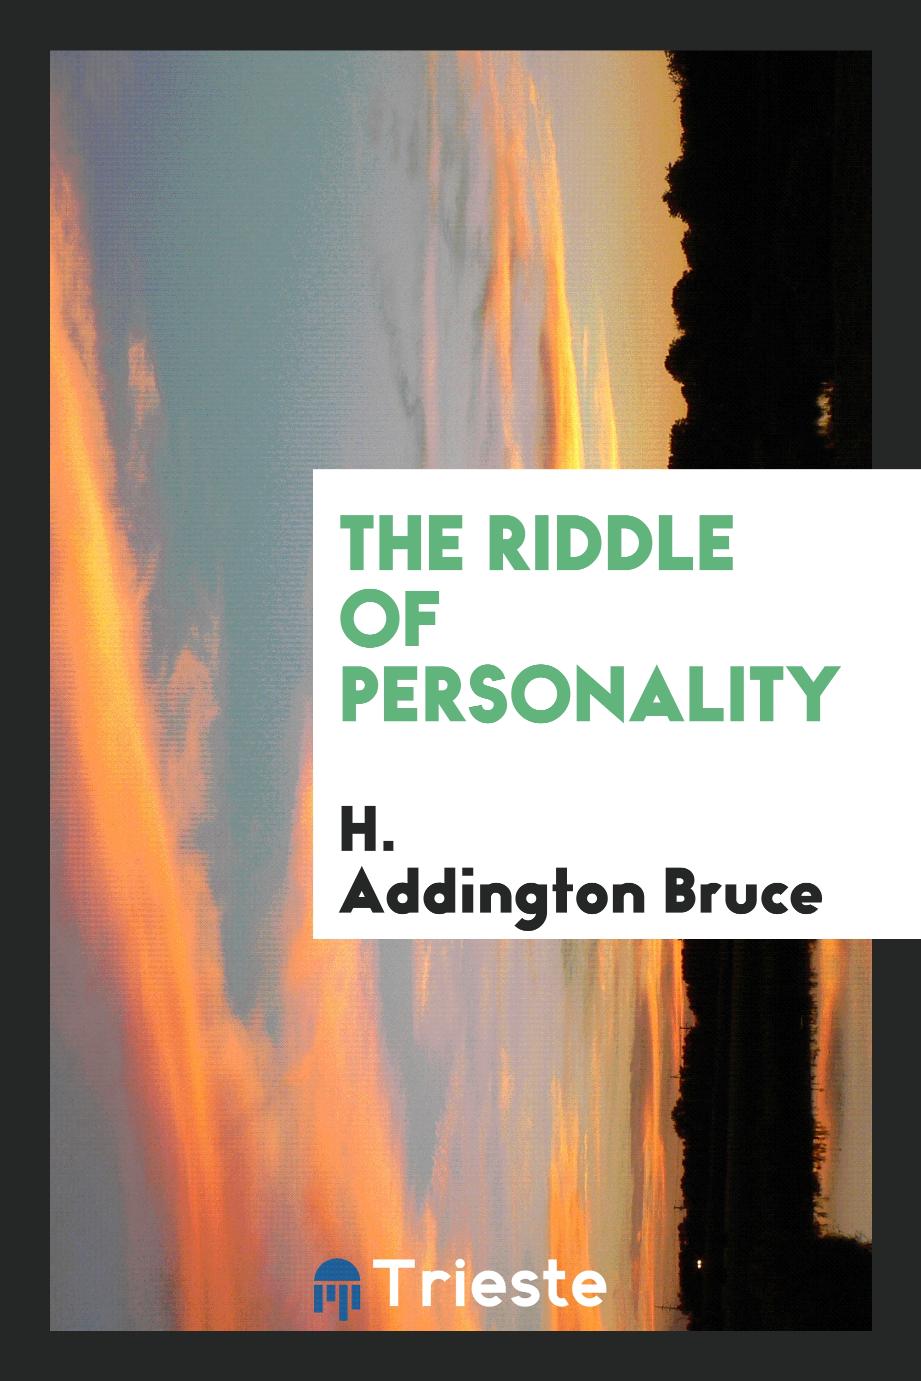 The riddle of personality